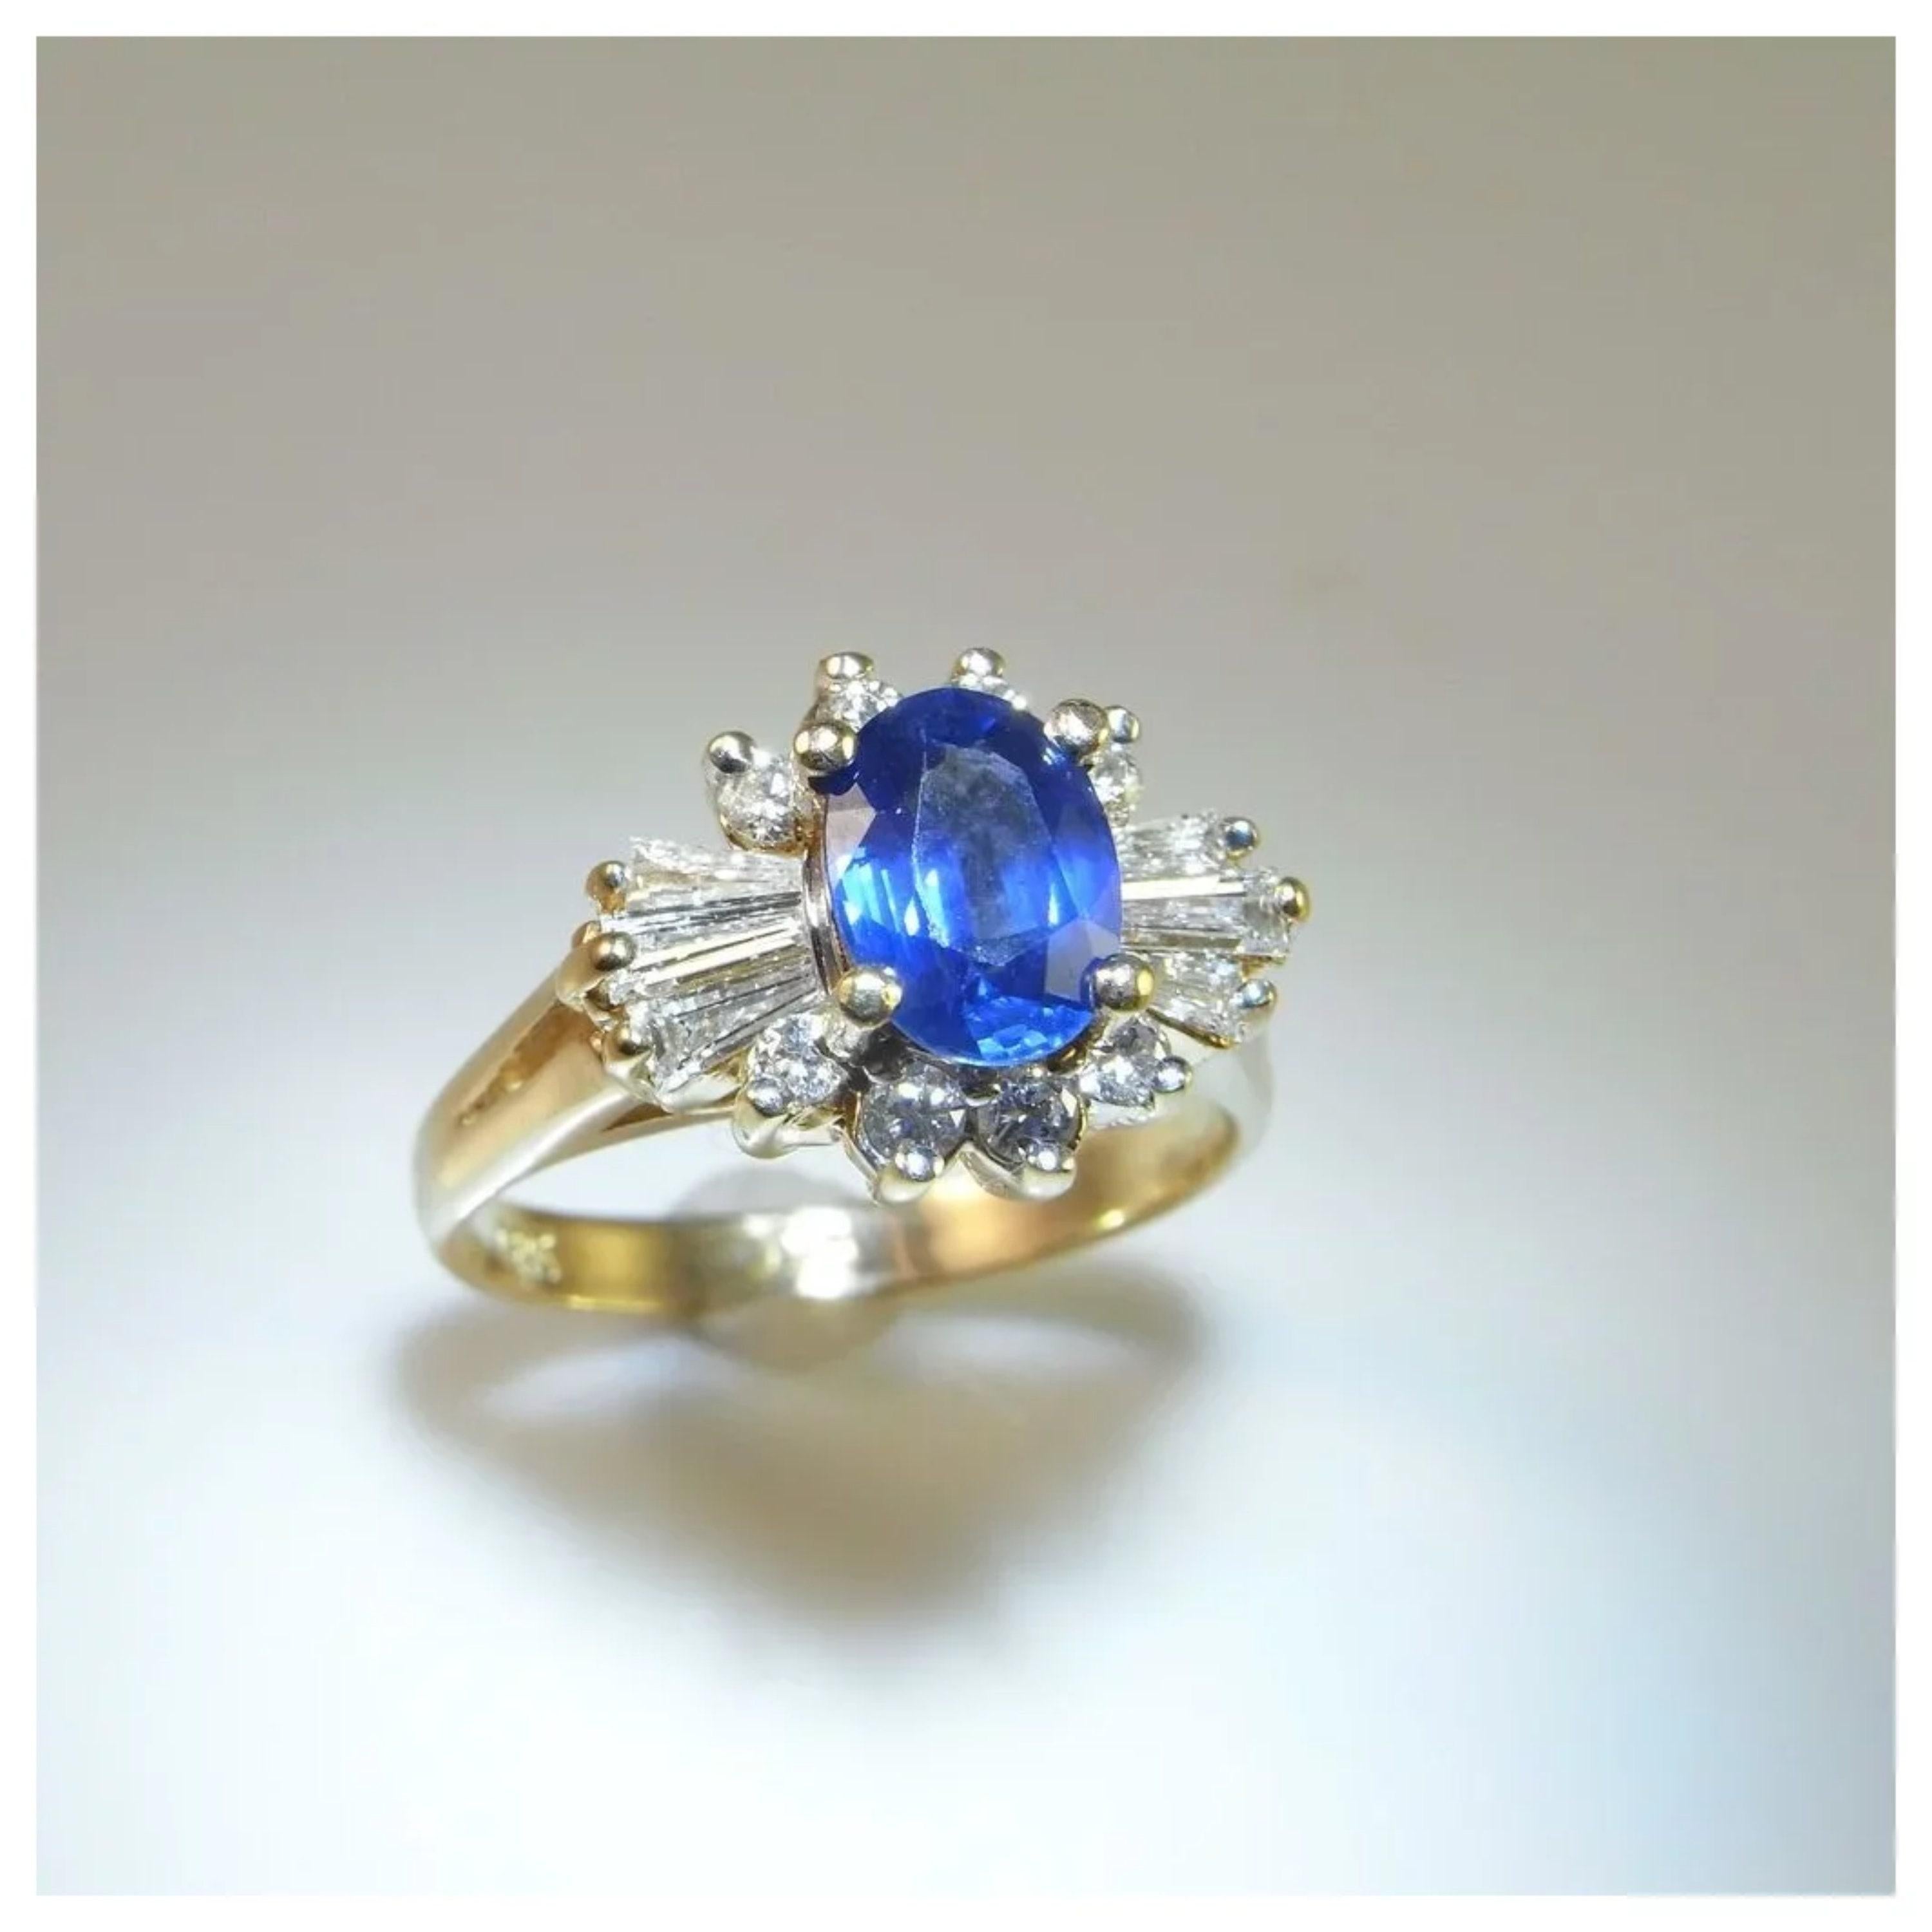 For Sale:  Floral Oval Cut Sapphire Diamond Engagement Ring, Art Deco Sapphire Diamond Ring 2